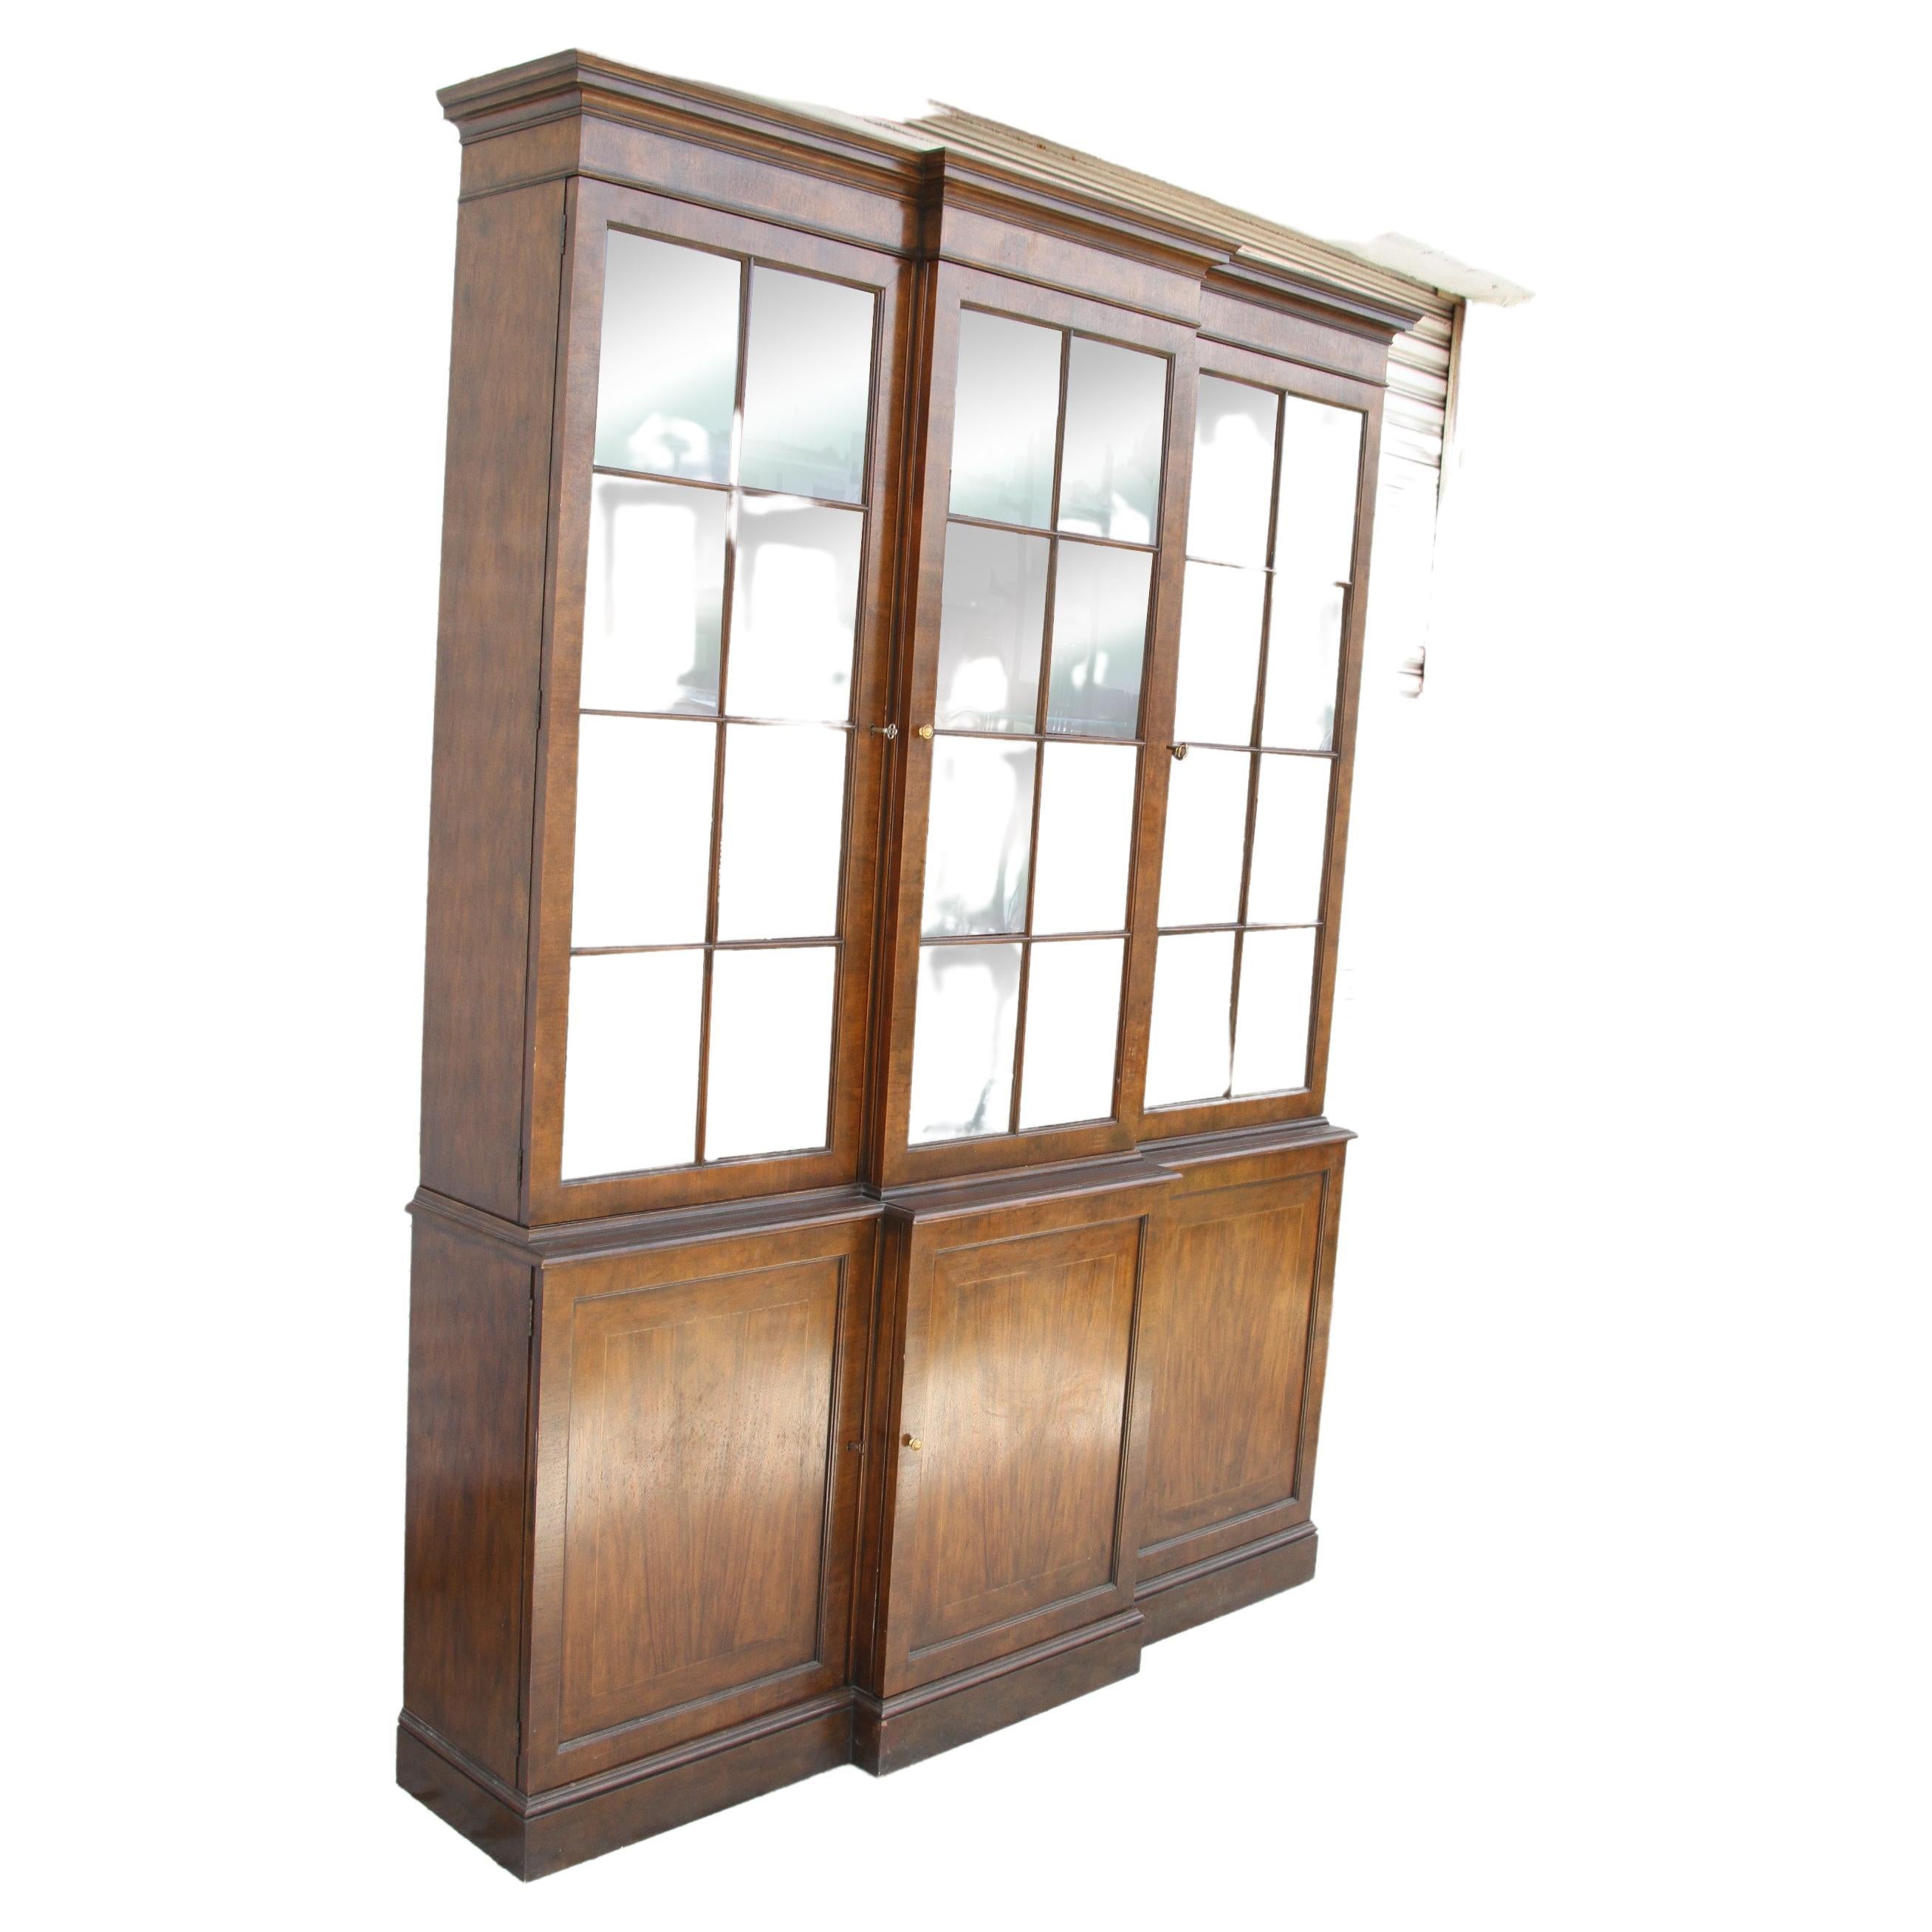 Baker Collection China Cabinet

Features generous shelving for china and collectible storage, interior lights and three concealed cabinets with shelving below.

65